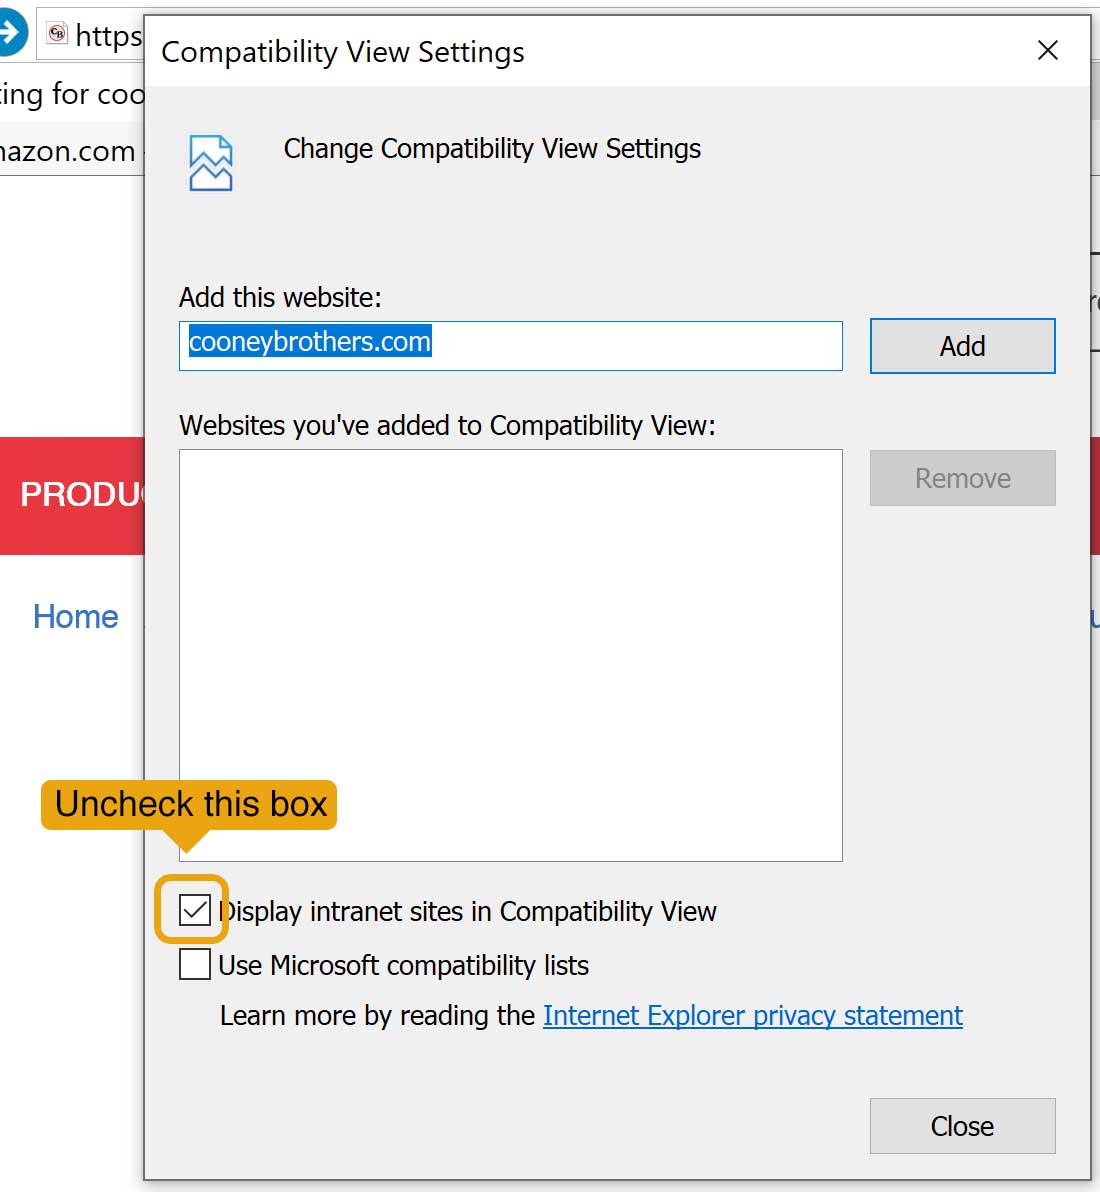 Uncheck the box next to Display intranet site in Compatibility View